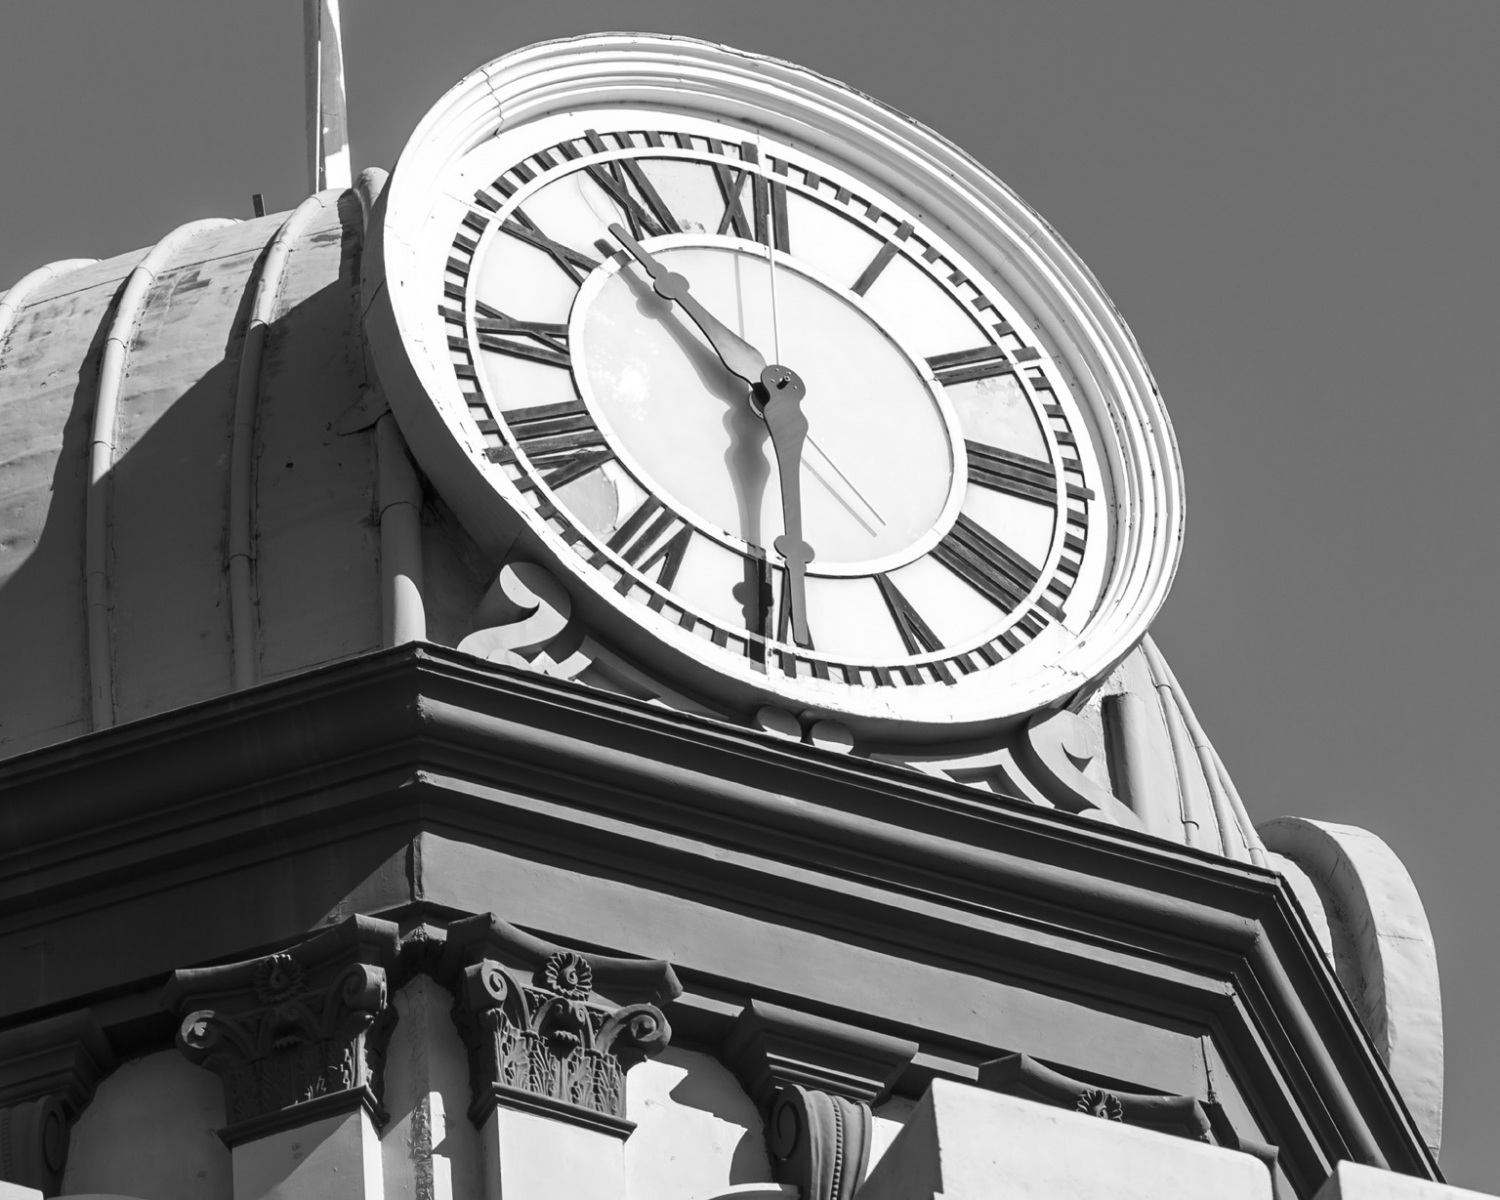 An image of the clock tower of the Fergus County Courthouse in Lewiston, Montana.  Designed by Newton C. Gauntt, the Lewiston courthouse was built in 1909.  The brick Fergus County Courthouse is part of the Lewiston Courthouse Historic District, which is listed on the National Register of Historic Places.  This image © Capitolshots Photography/TwoFiftyFour Photos, LLC, ALL RIGHTS RESERVED.